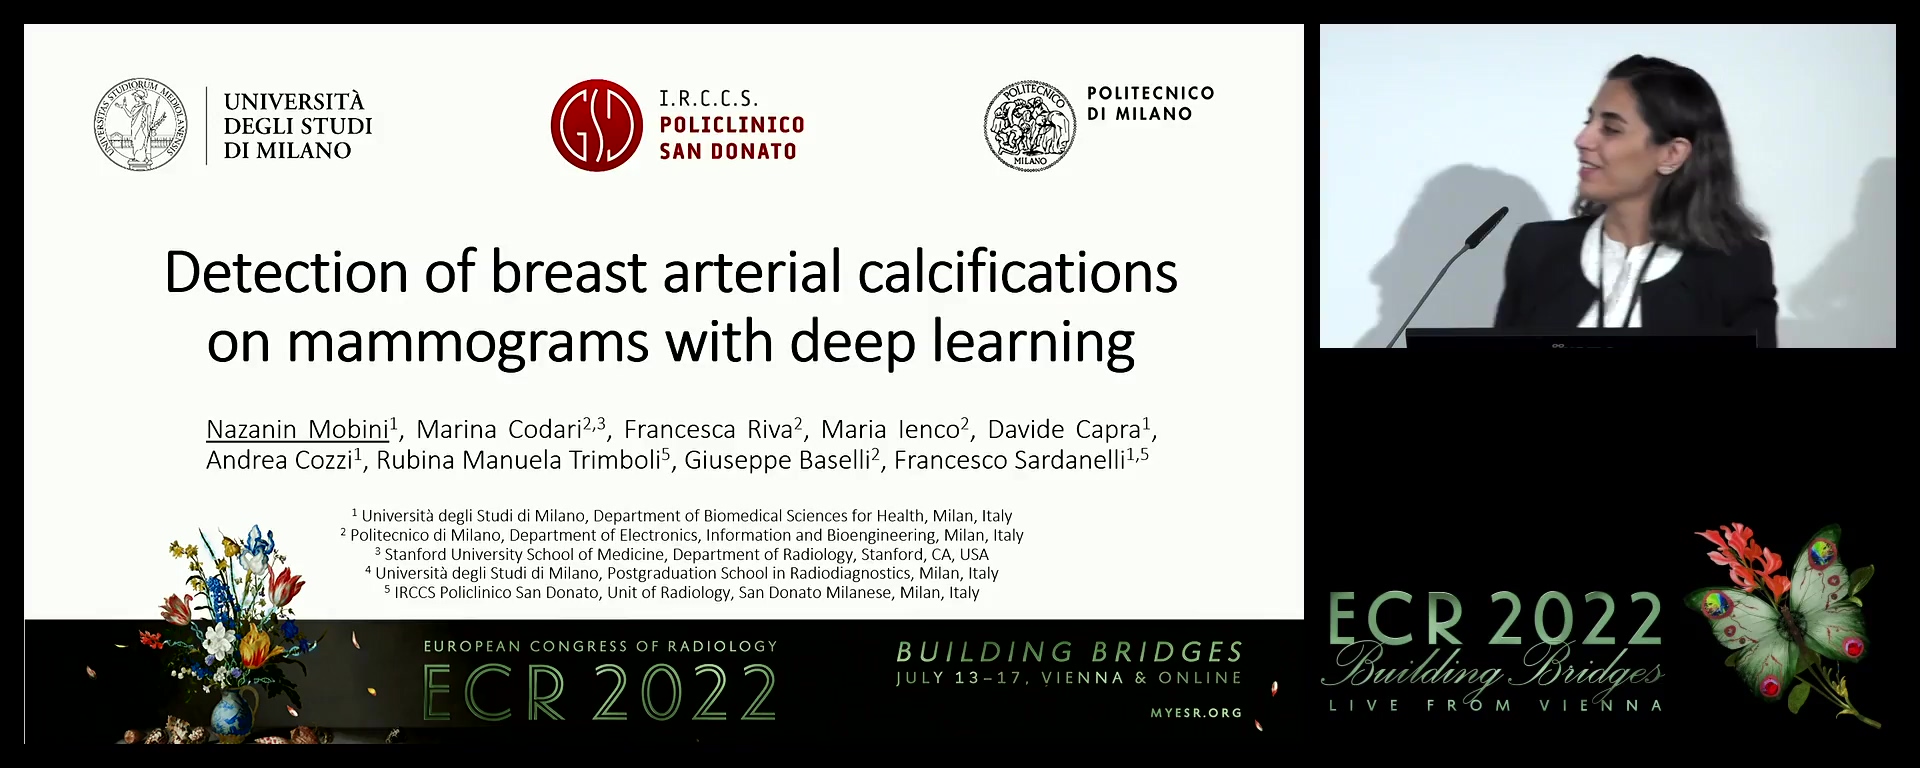 Detection of breast arterial calcifications on mammograms with deep learning - Nazanin Mobini, Milan / IT